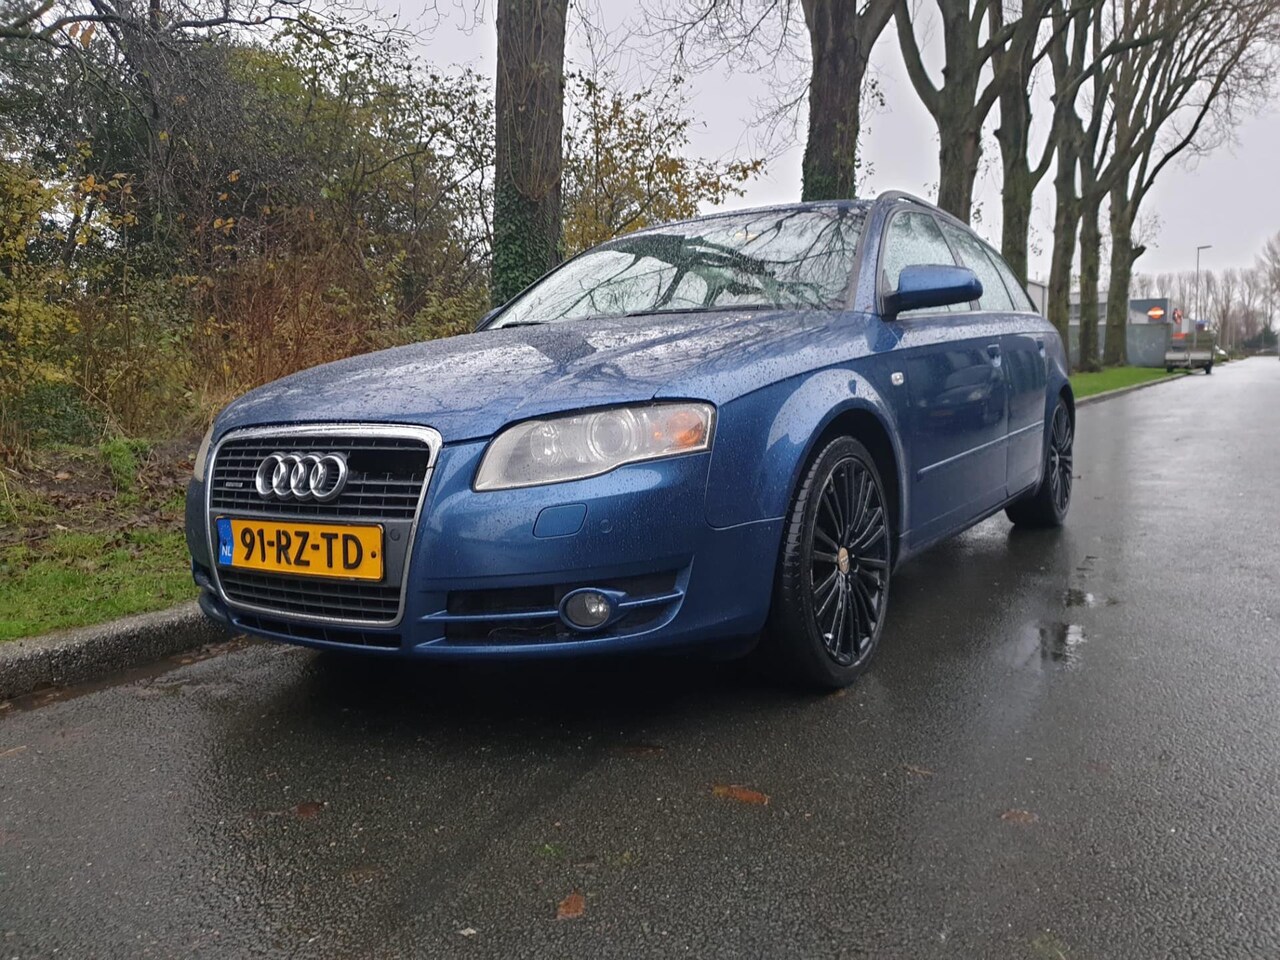 audi a4 quattro diesel used – Search your used on the parking